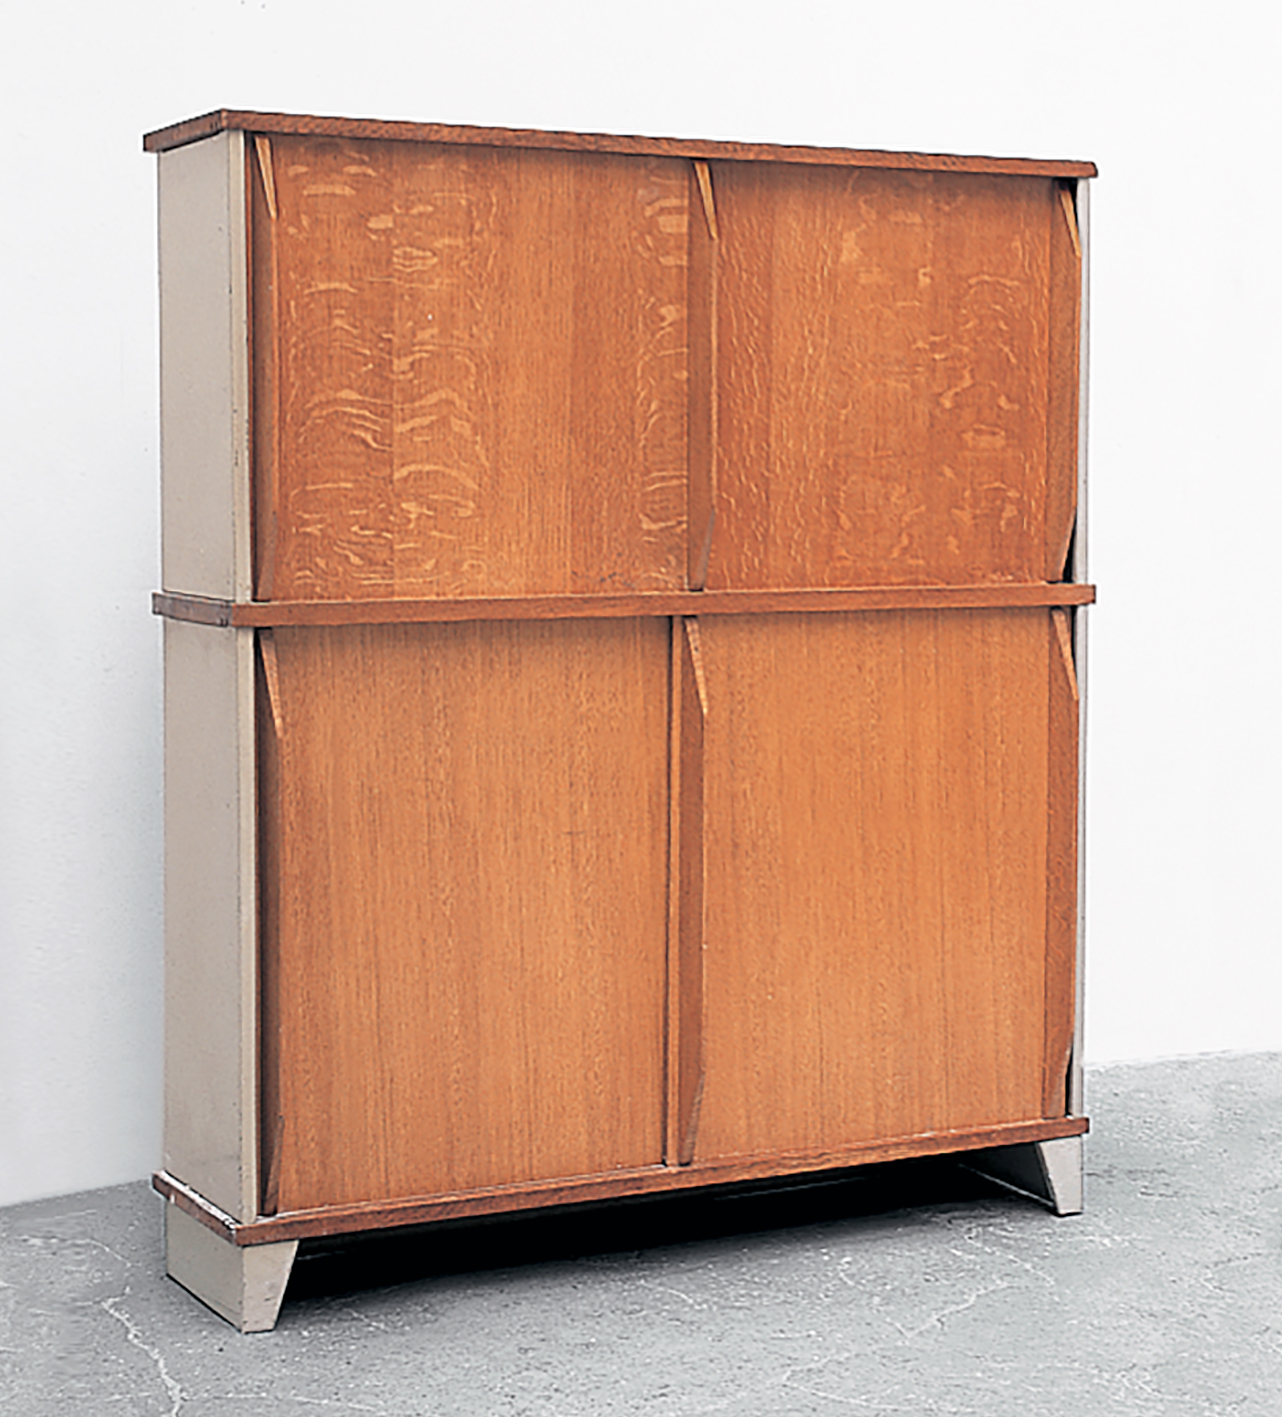 Wardrobe, variant with Flavigny bed-type legs, 1945. Special commission.